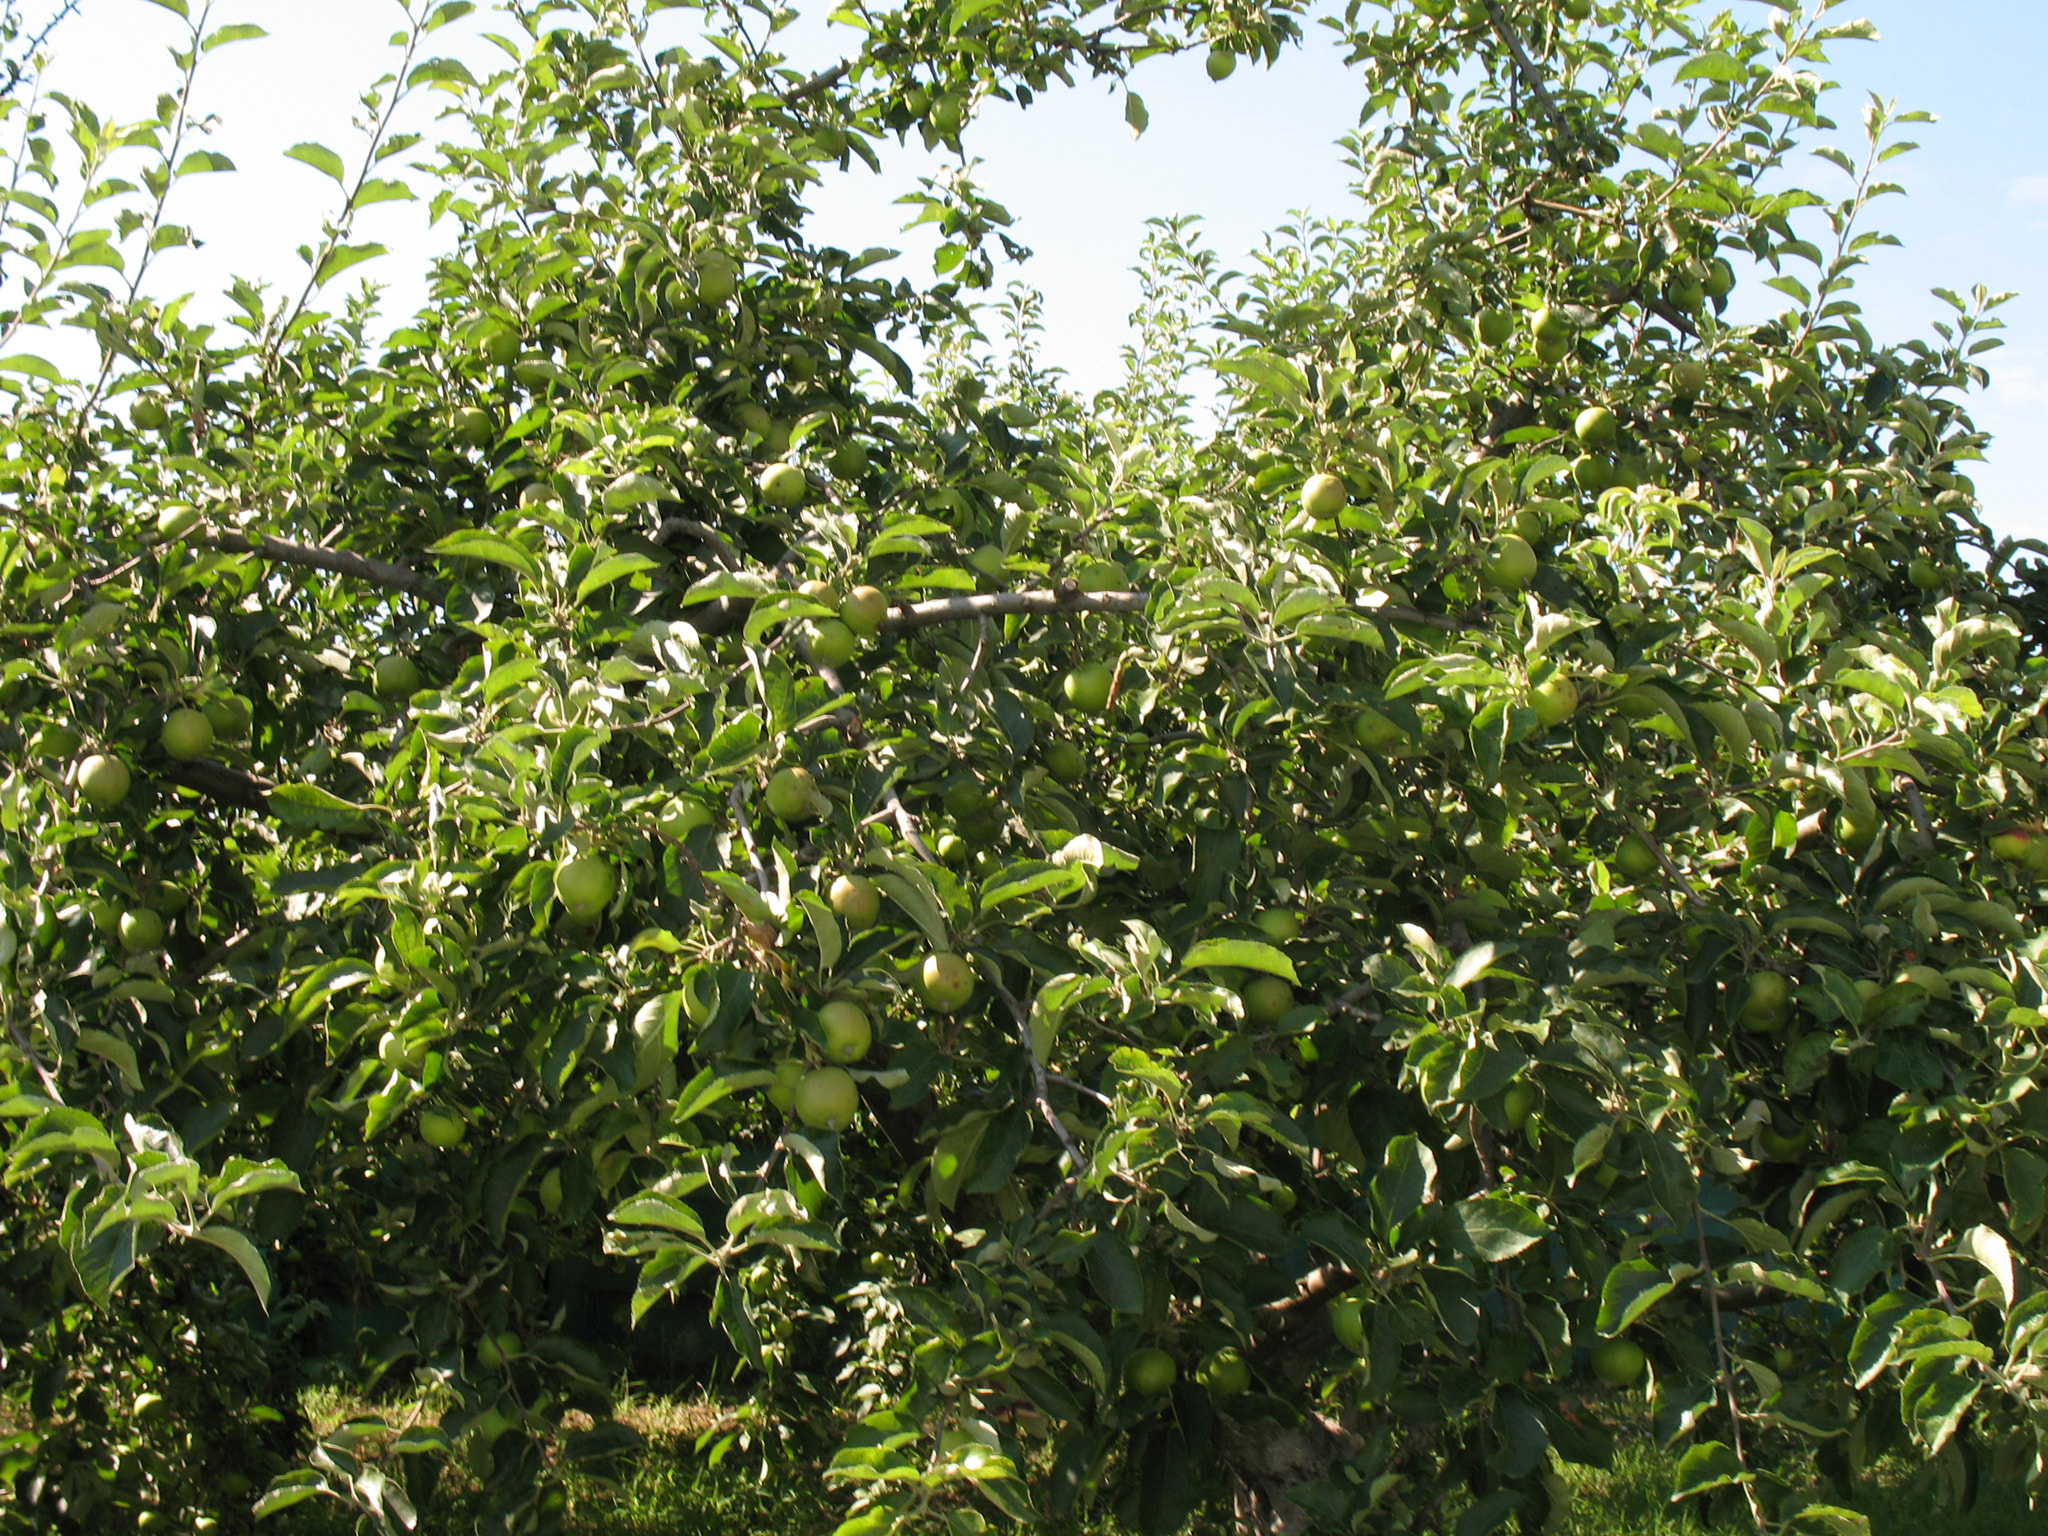 Canon POWERSHOT A630 sample photo. Apple tree with green apples yet. photography